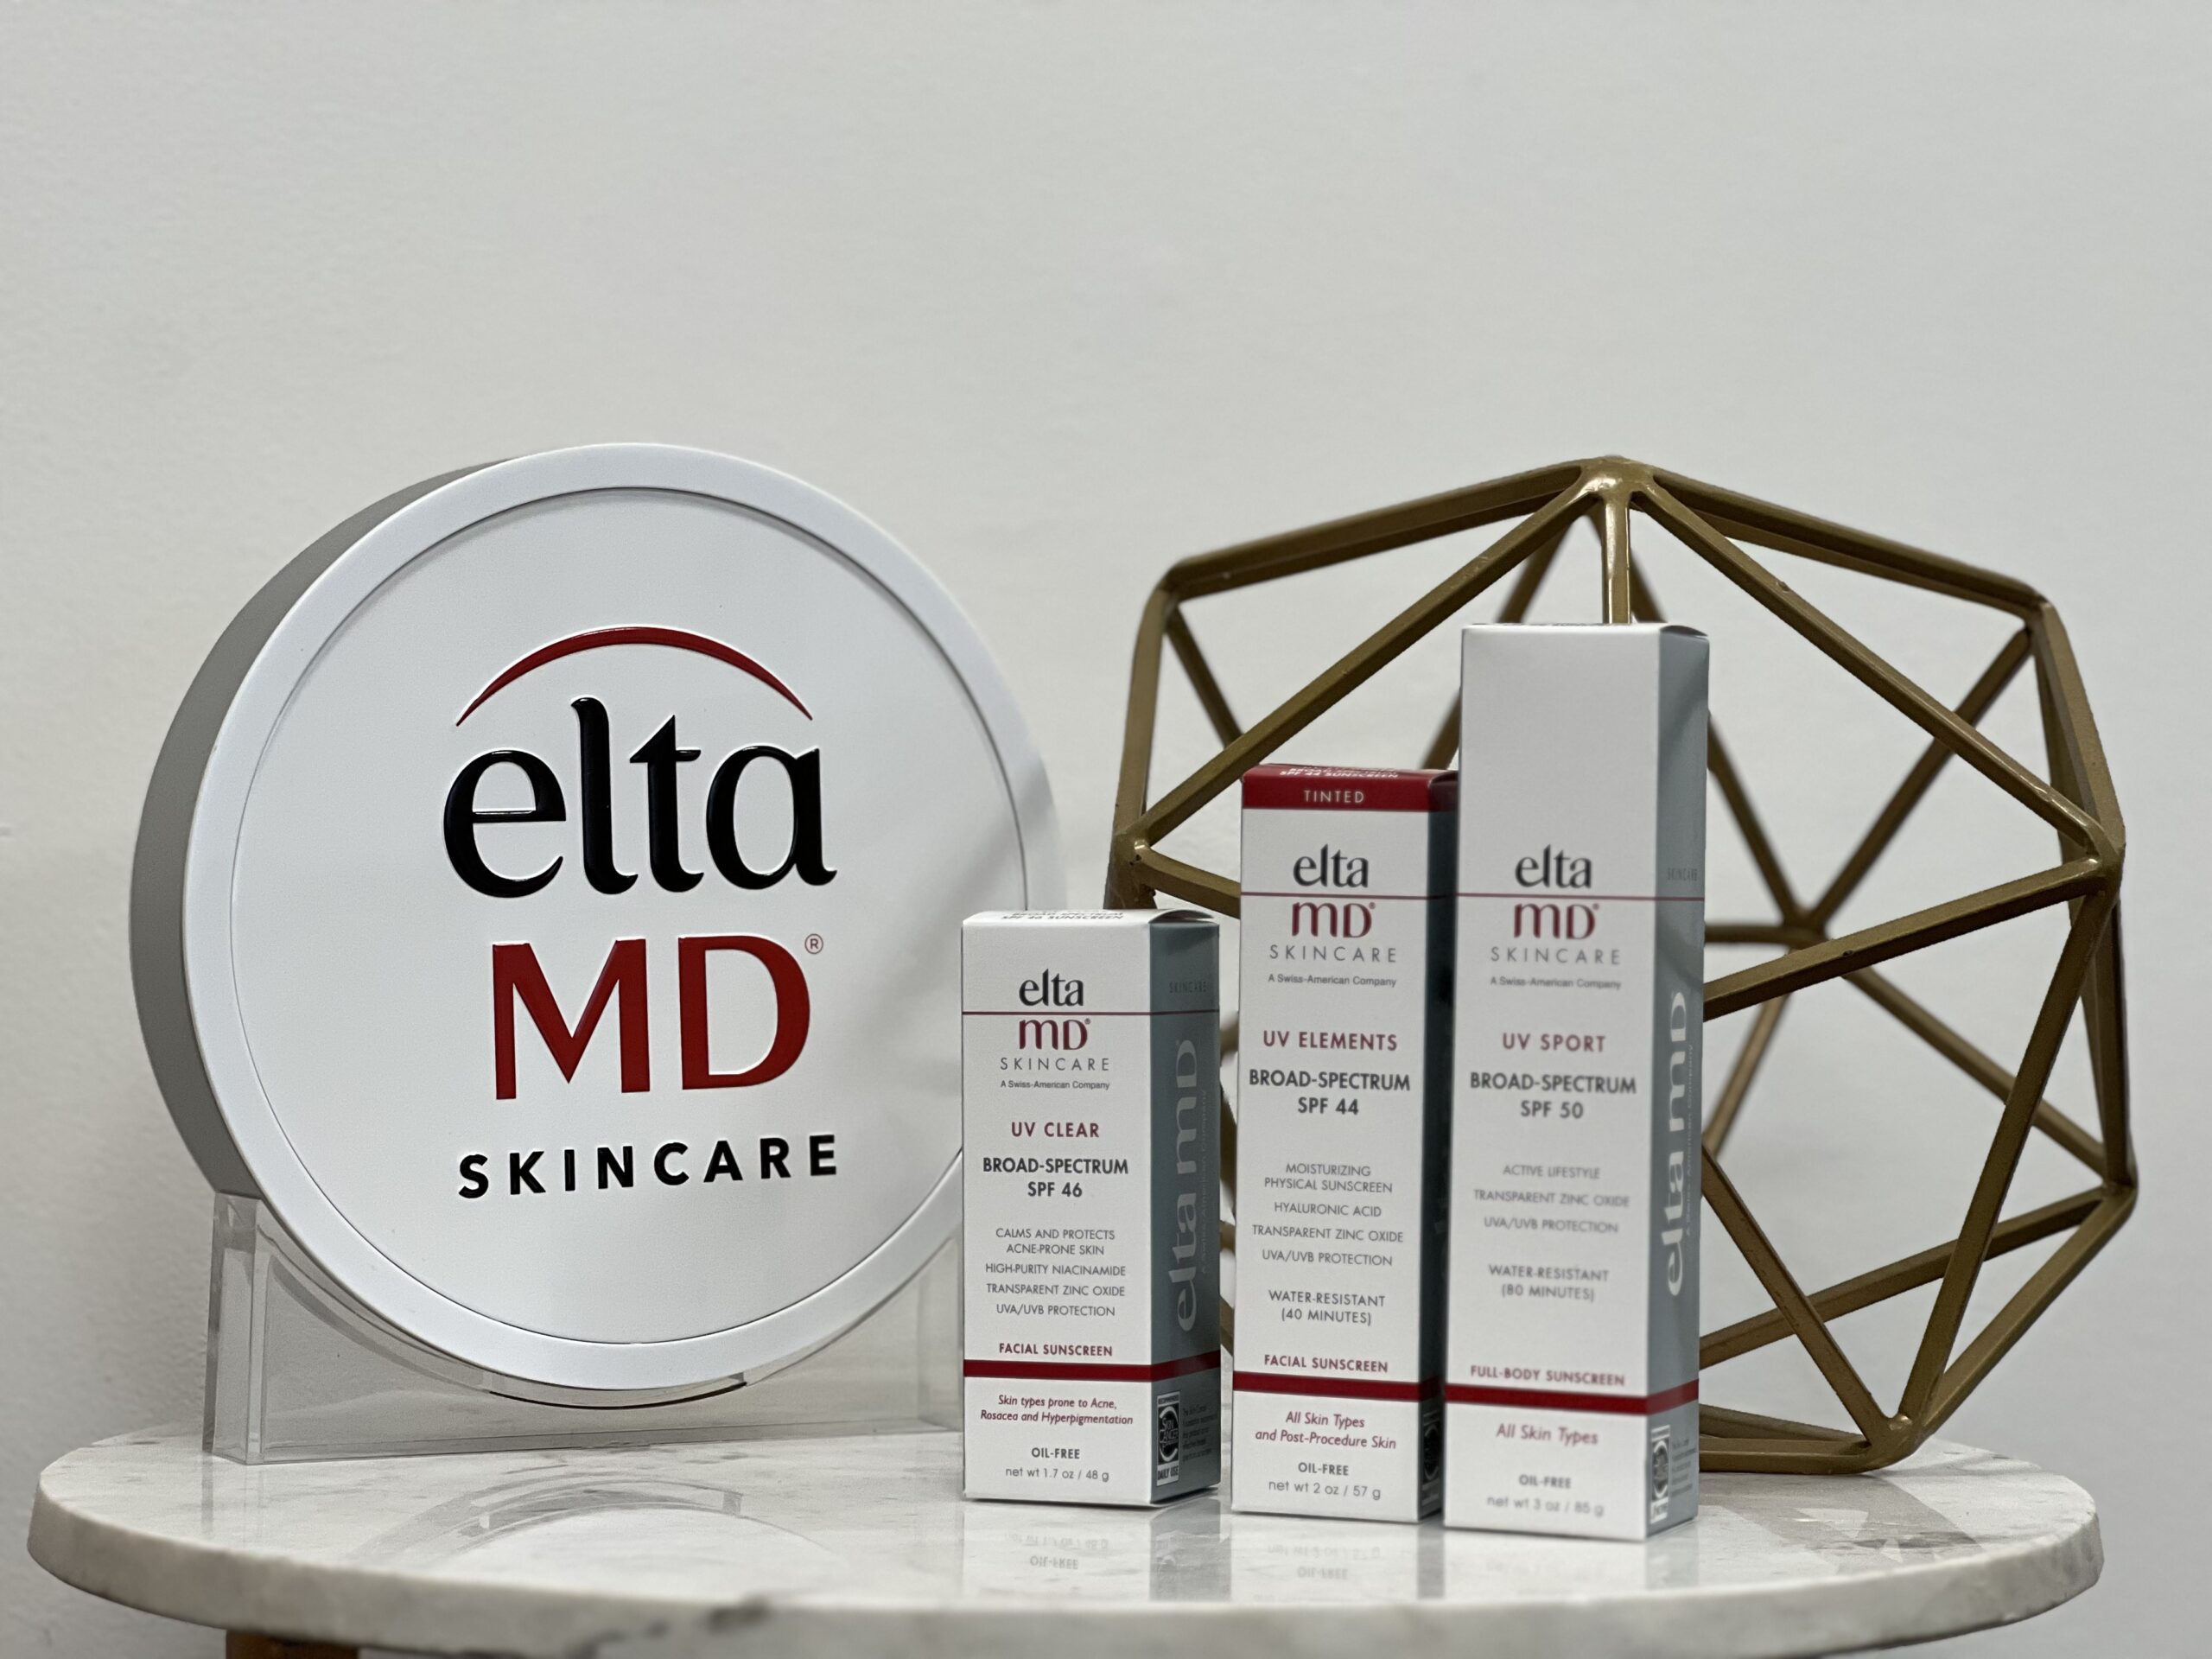 EltaMD - Dermatologist Recommended Sunscreens and Skin Care Products